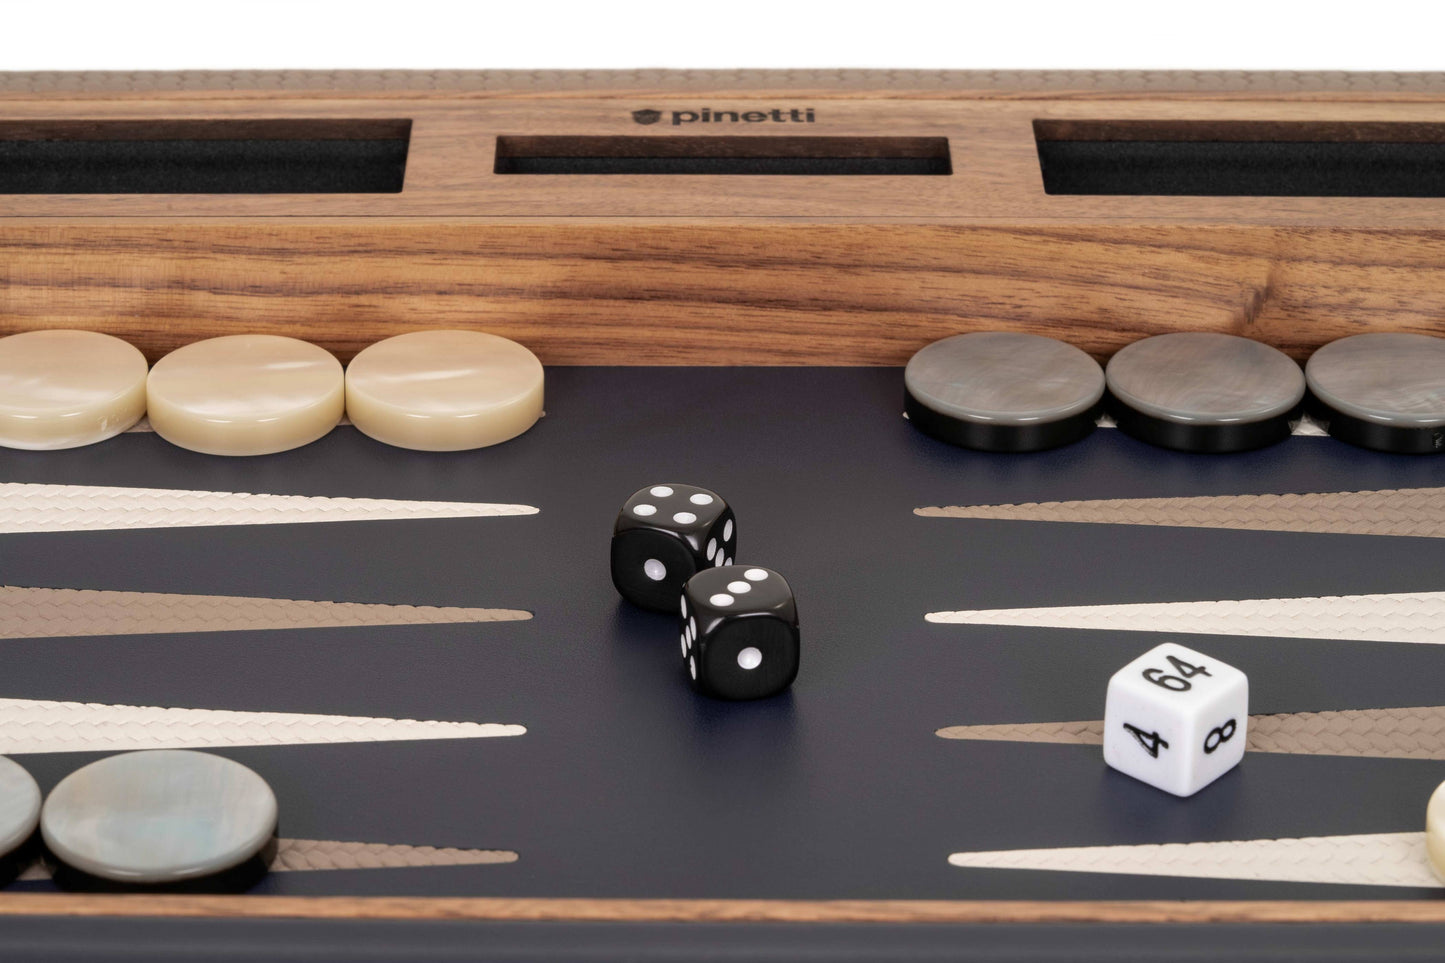 Pinetti Leather-Covered Walnut Wood Backgammon Game Set | Exquisite Craftsmanship | Premium Walnut Wood Construction | Elegant Leather Cover | Perfect for Leisure and Entertainment | Explore a Range of Luxury Home Accessories at 2Jour Concierge, #1 luxury high-end gift & lifestyle shop